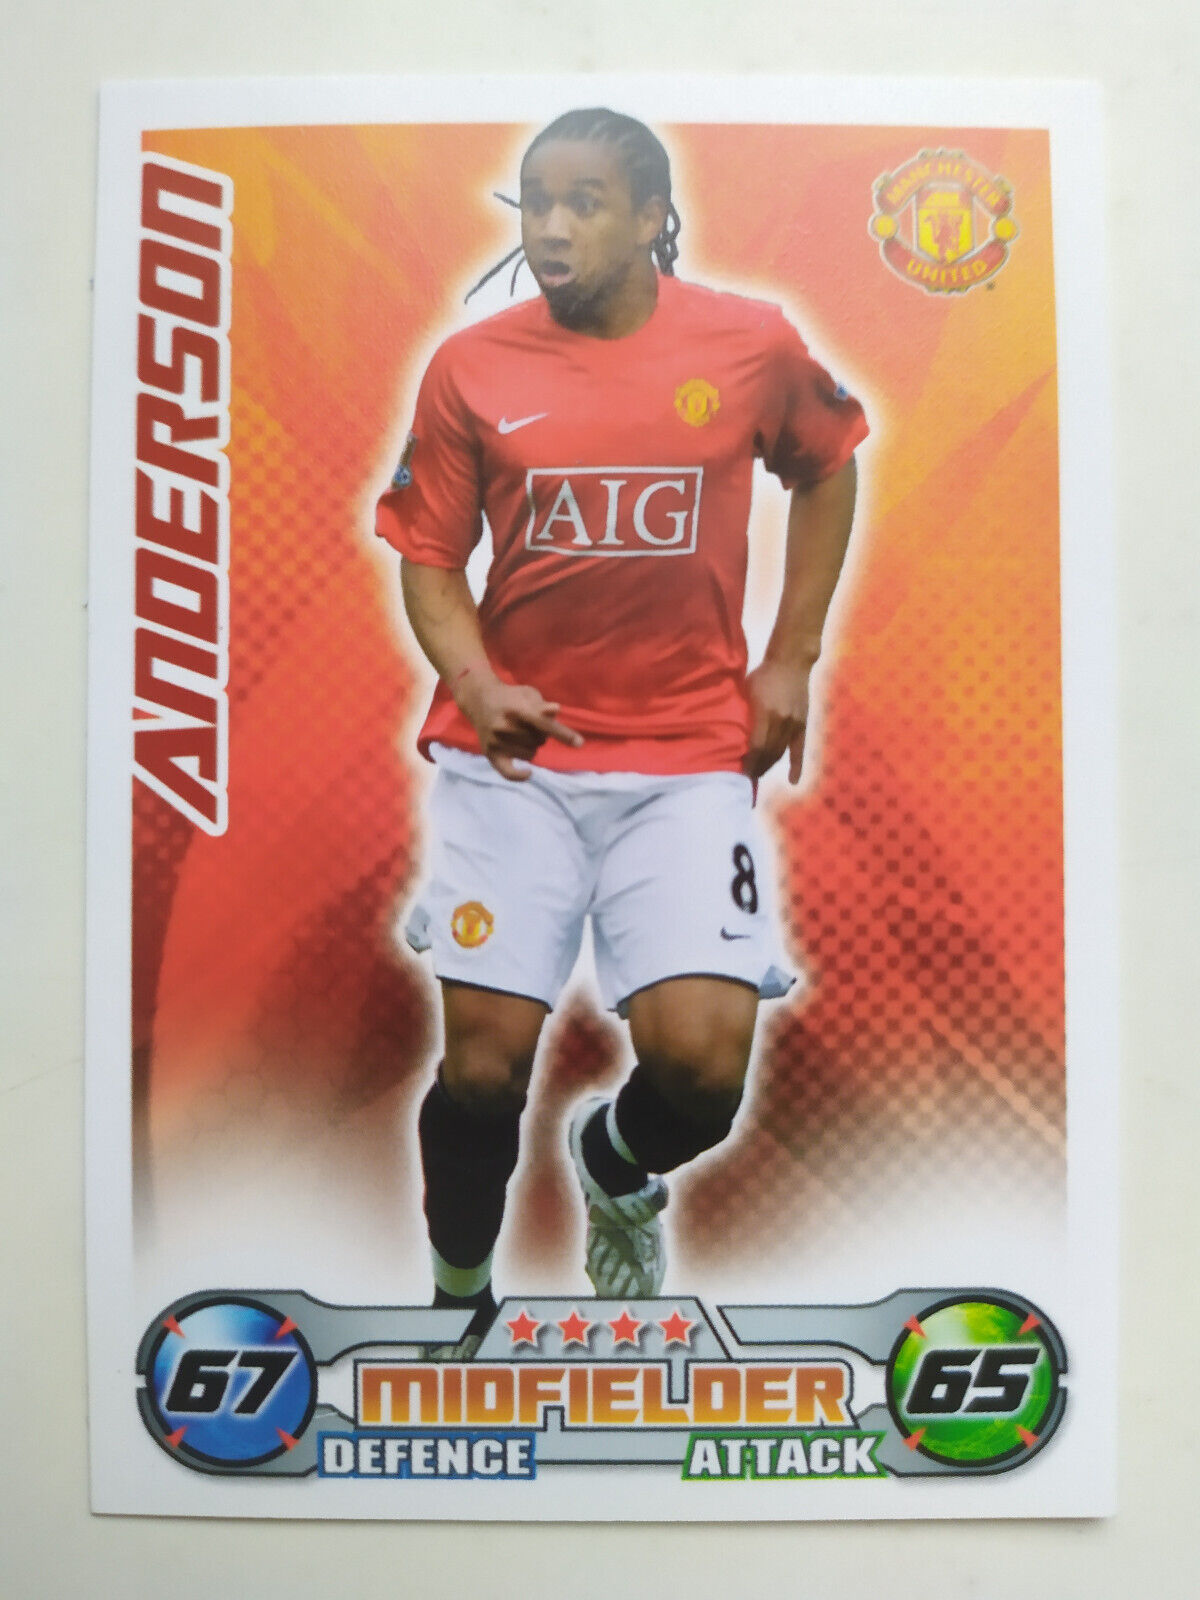 Match Attax Topps Trading Card Premier League 2008 / 2009 Anderson